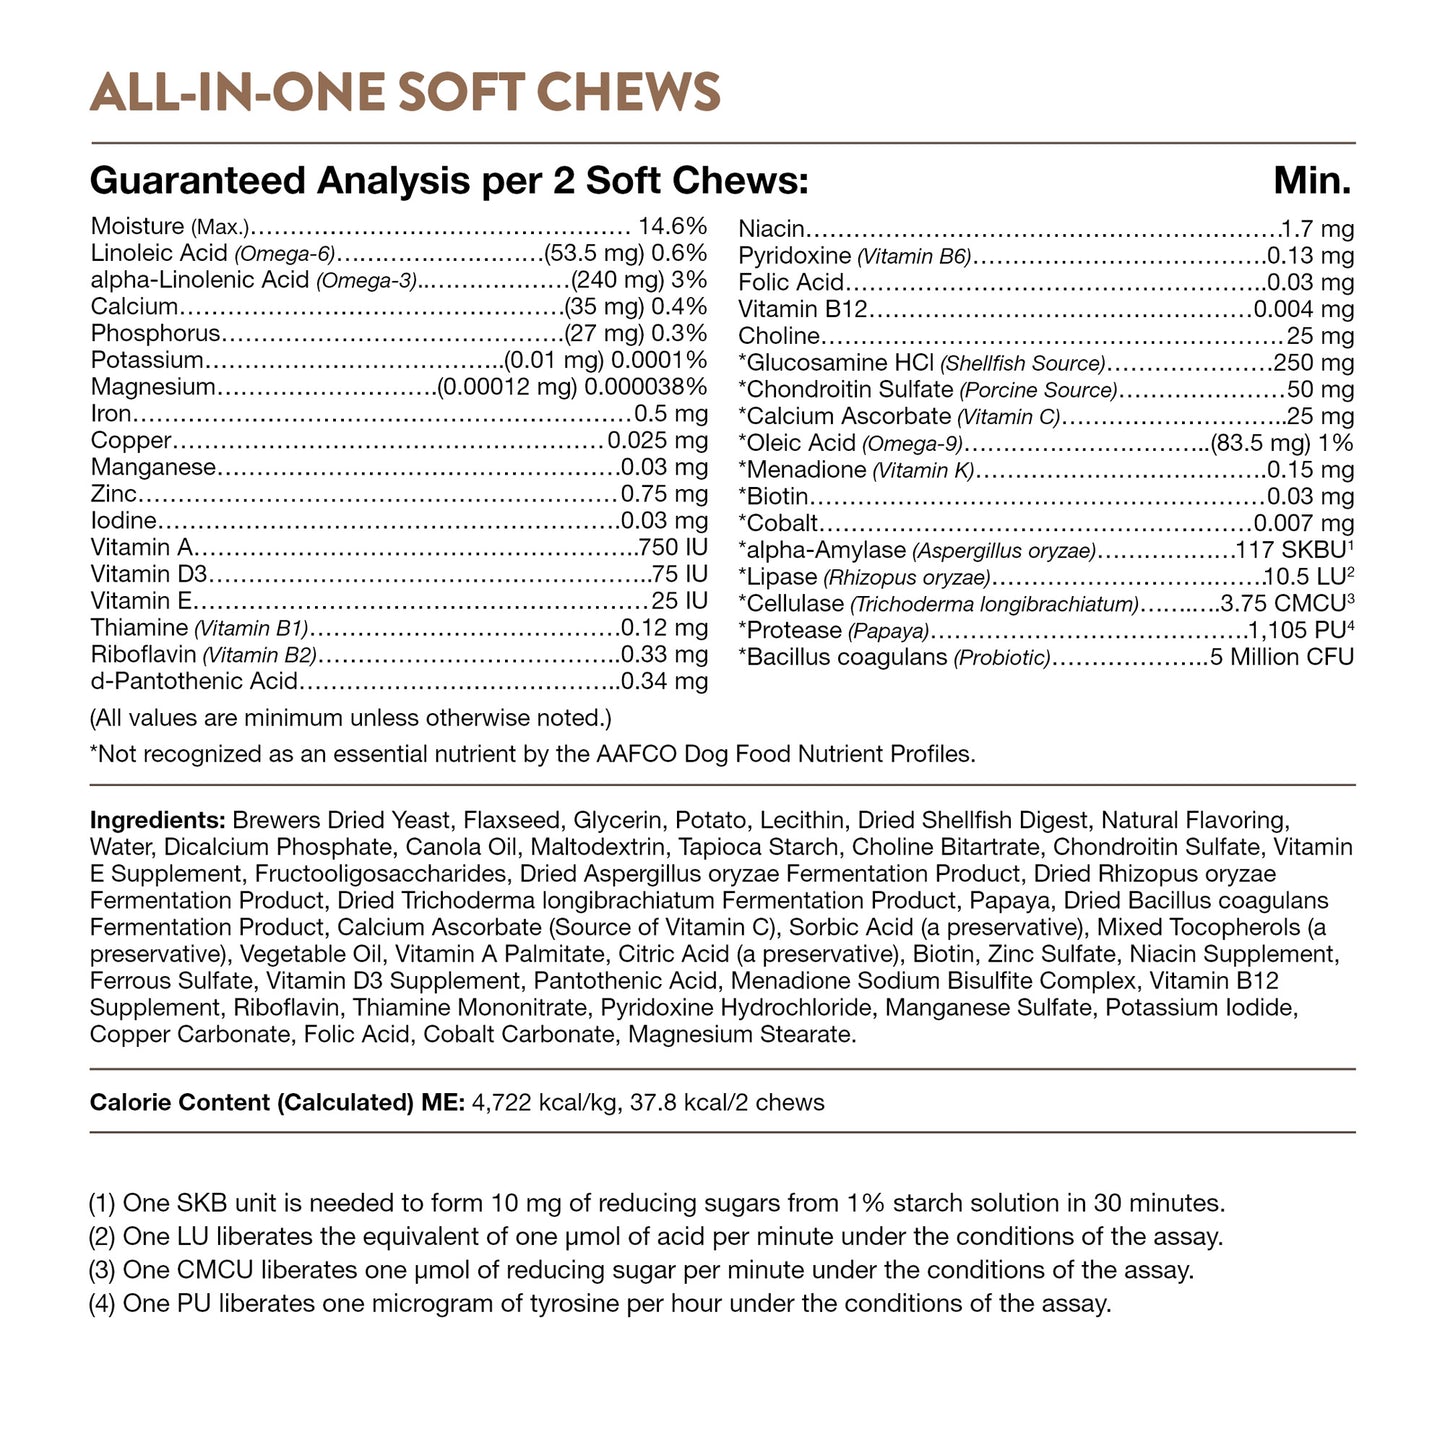 All-In-One Soft Chews